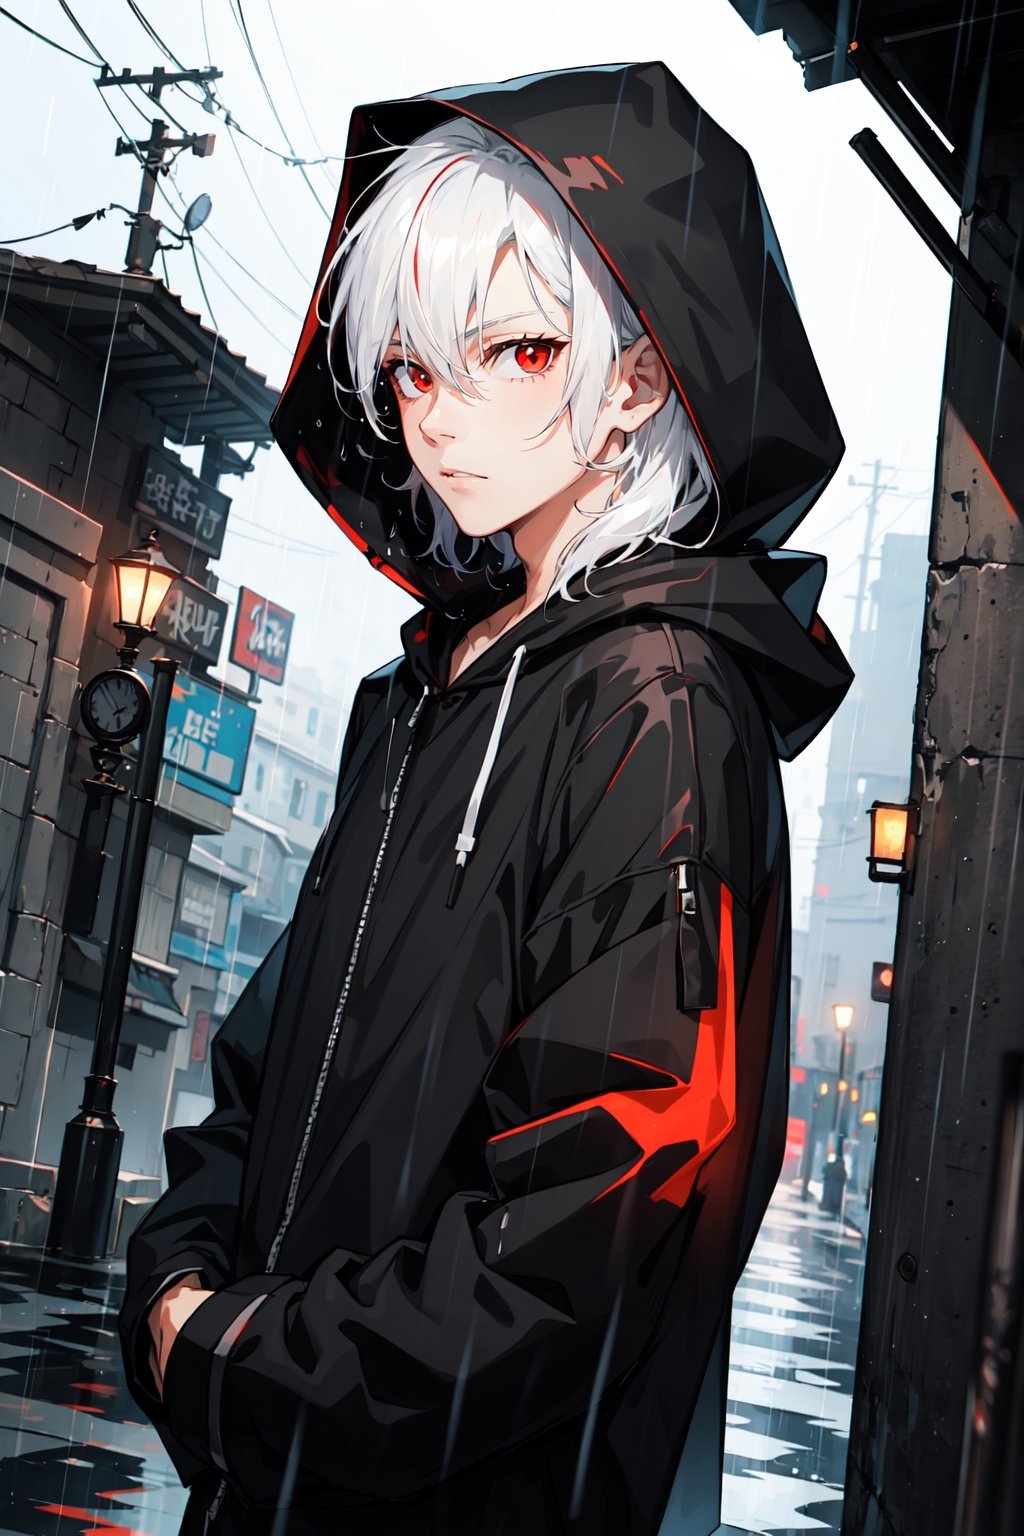 A boy with white hair wearing a hood and black clothes in the rain, highlighted by his red eyes.